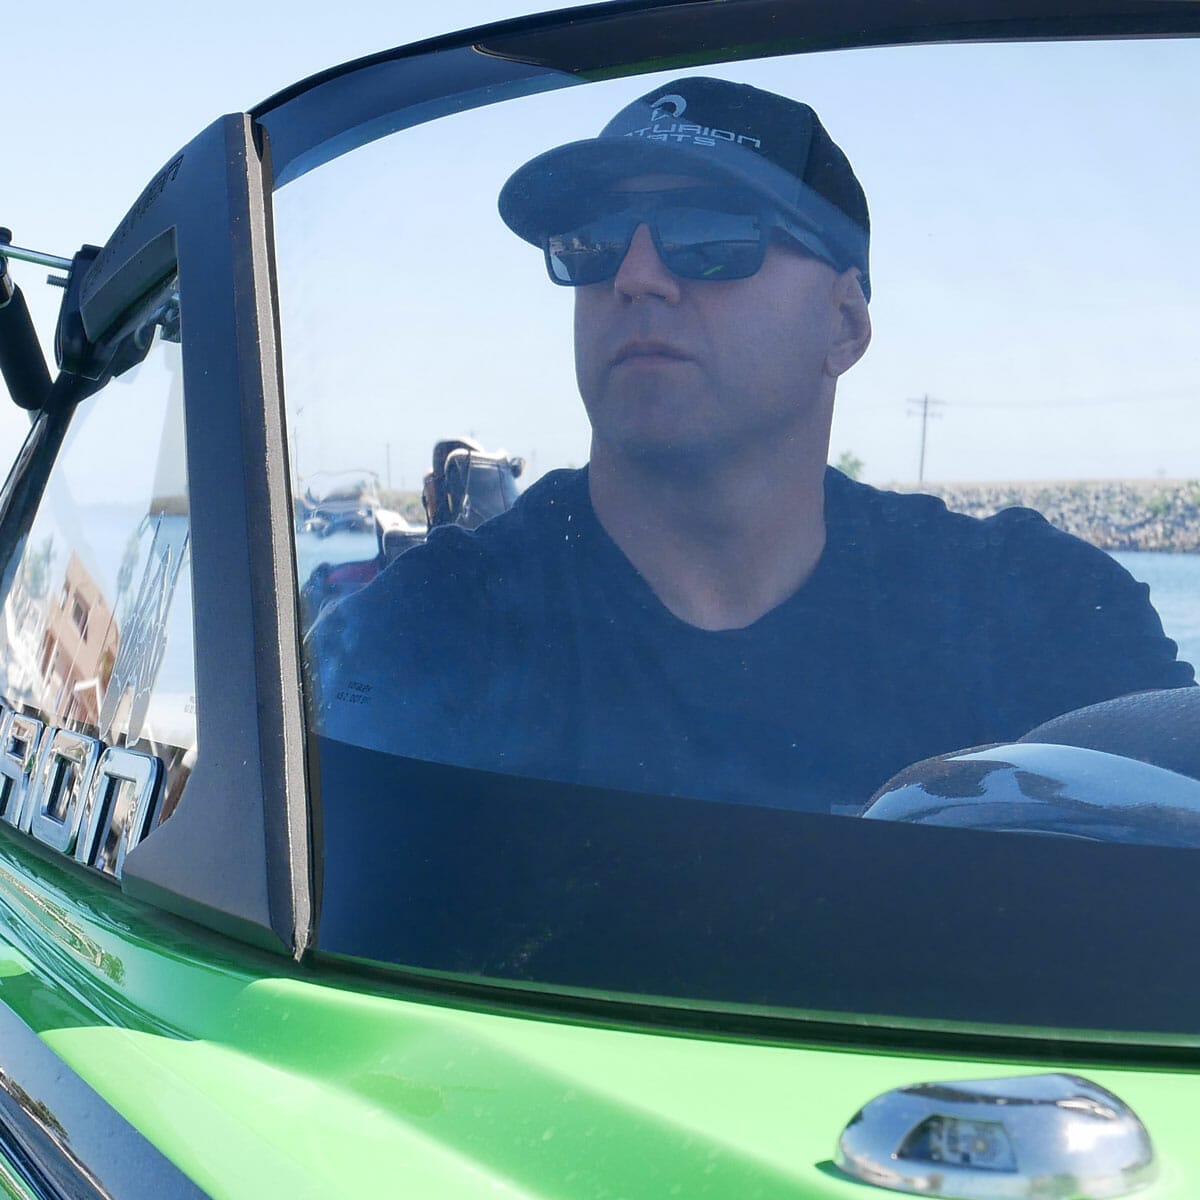 A man in sunglasses is driving a green wakesurf boat.